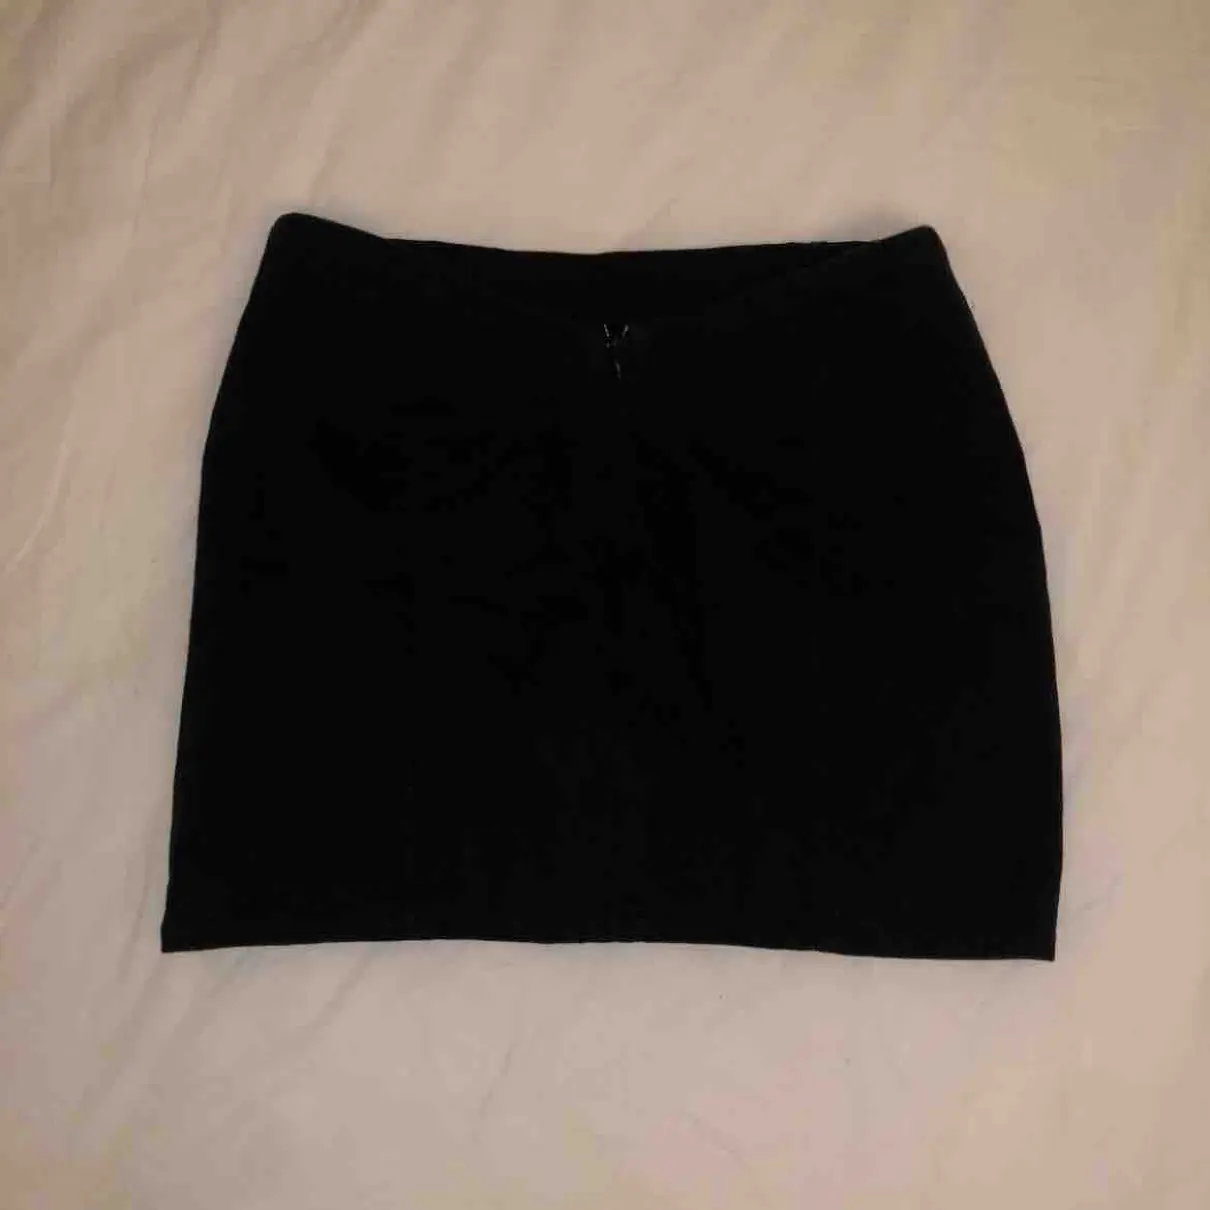 Buy Are You Am I Mini skirt online